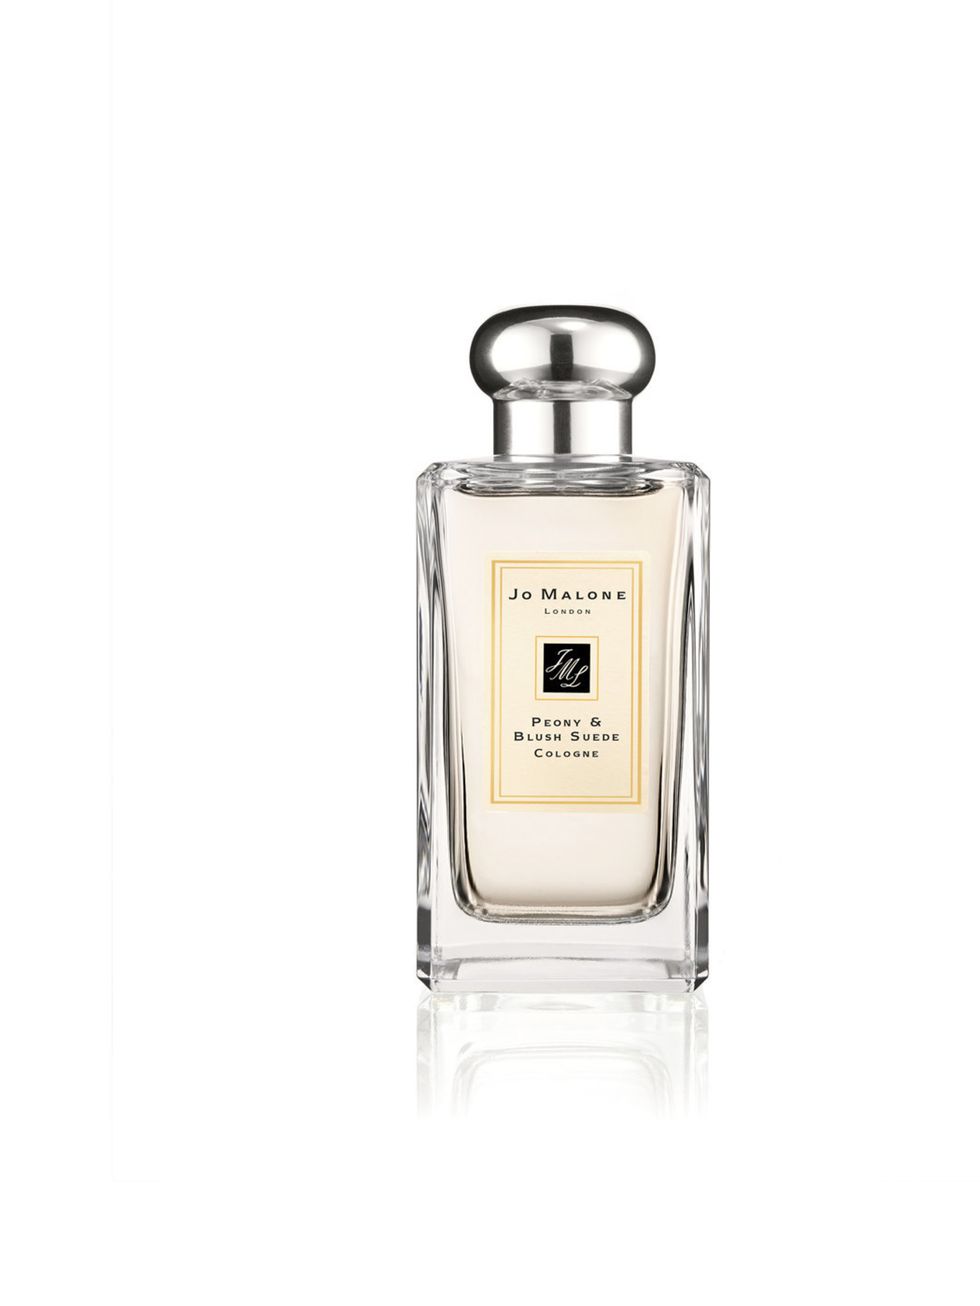 <p><strong>Highly Commended:</strong> <a href="http://www.jomalone.co.uk/product/11562/27028/Fragrances/Colognes/Floral/Peony-Blush-Suede/Peony-Blush-Suede/Cologne/index.tmpl">Jo Malone Peony and Blush Suede Cologne 100ml, £78</a></p><p>The light blend of